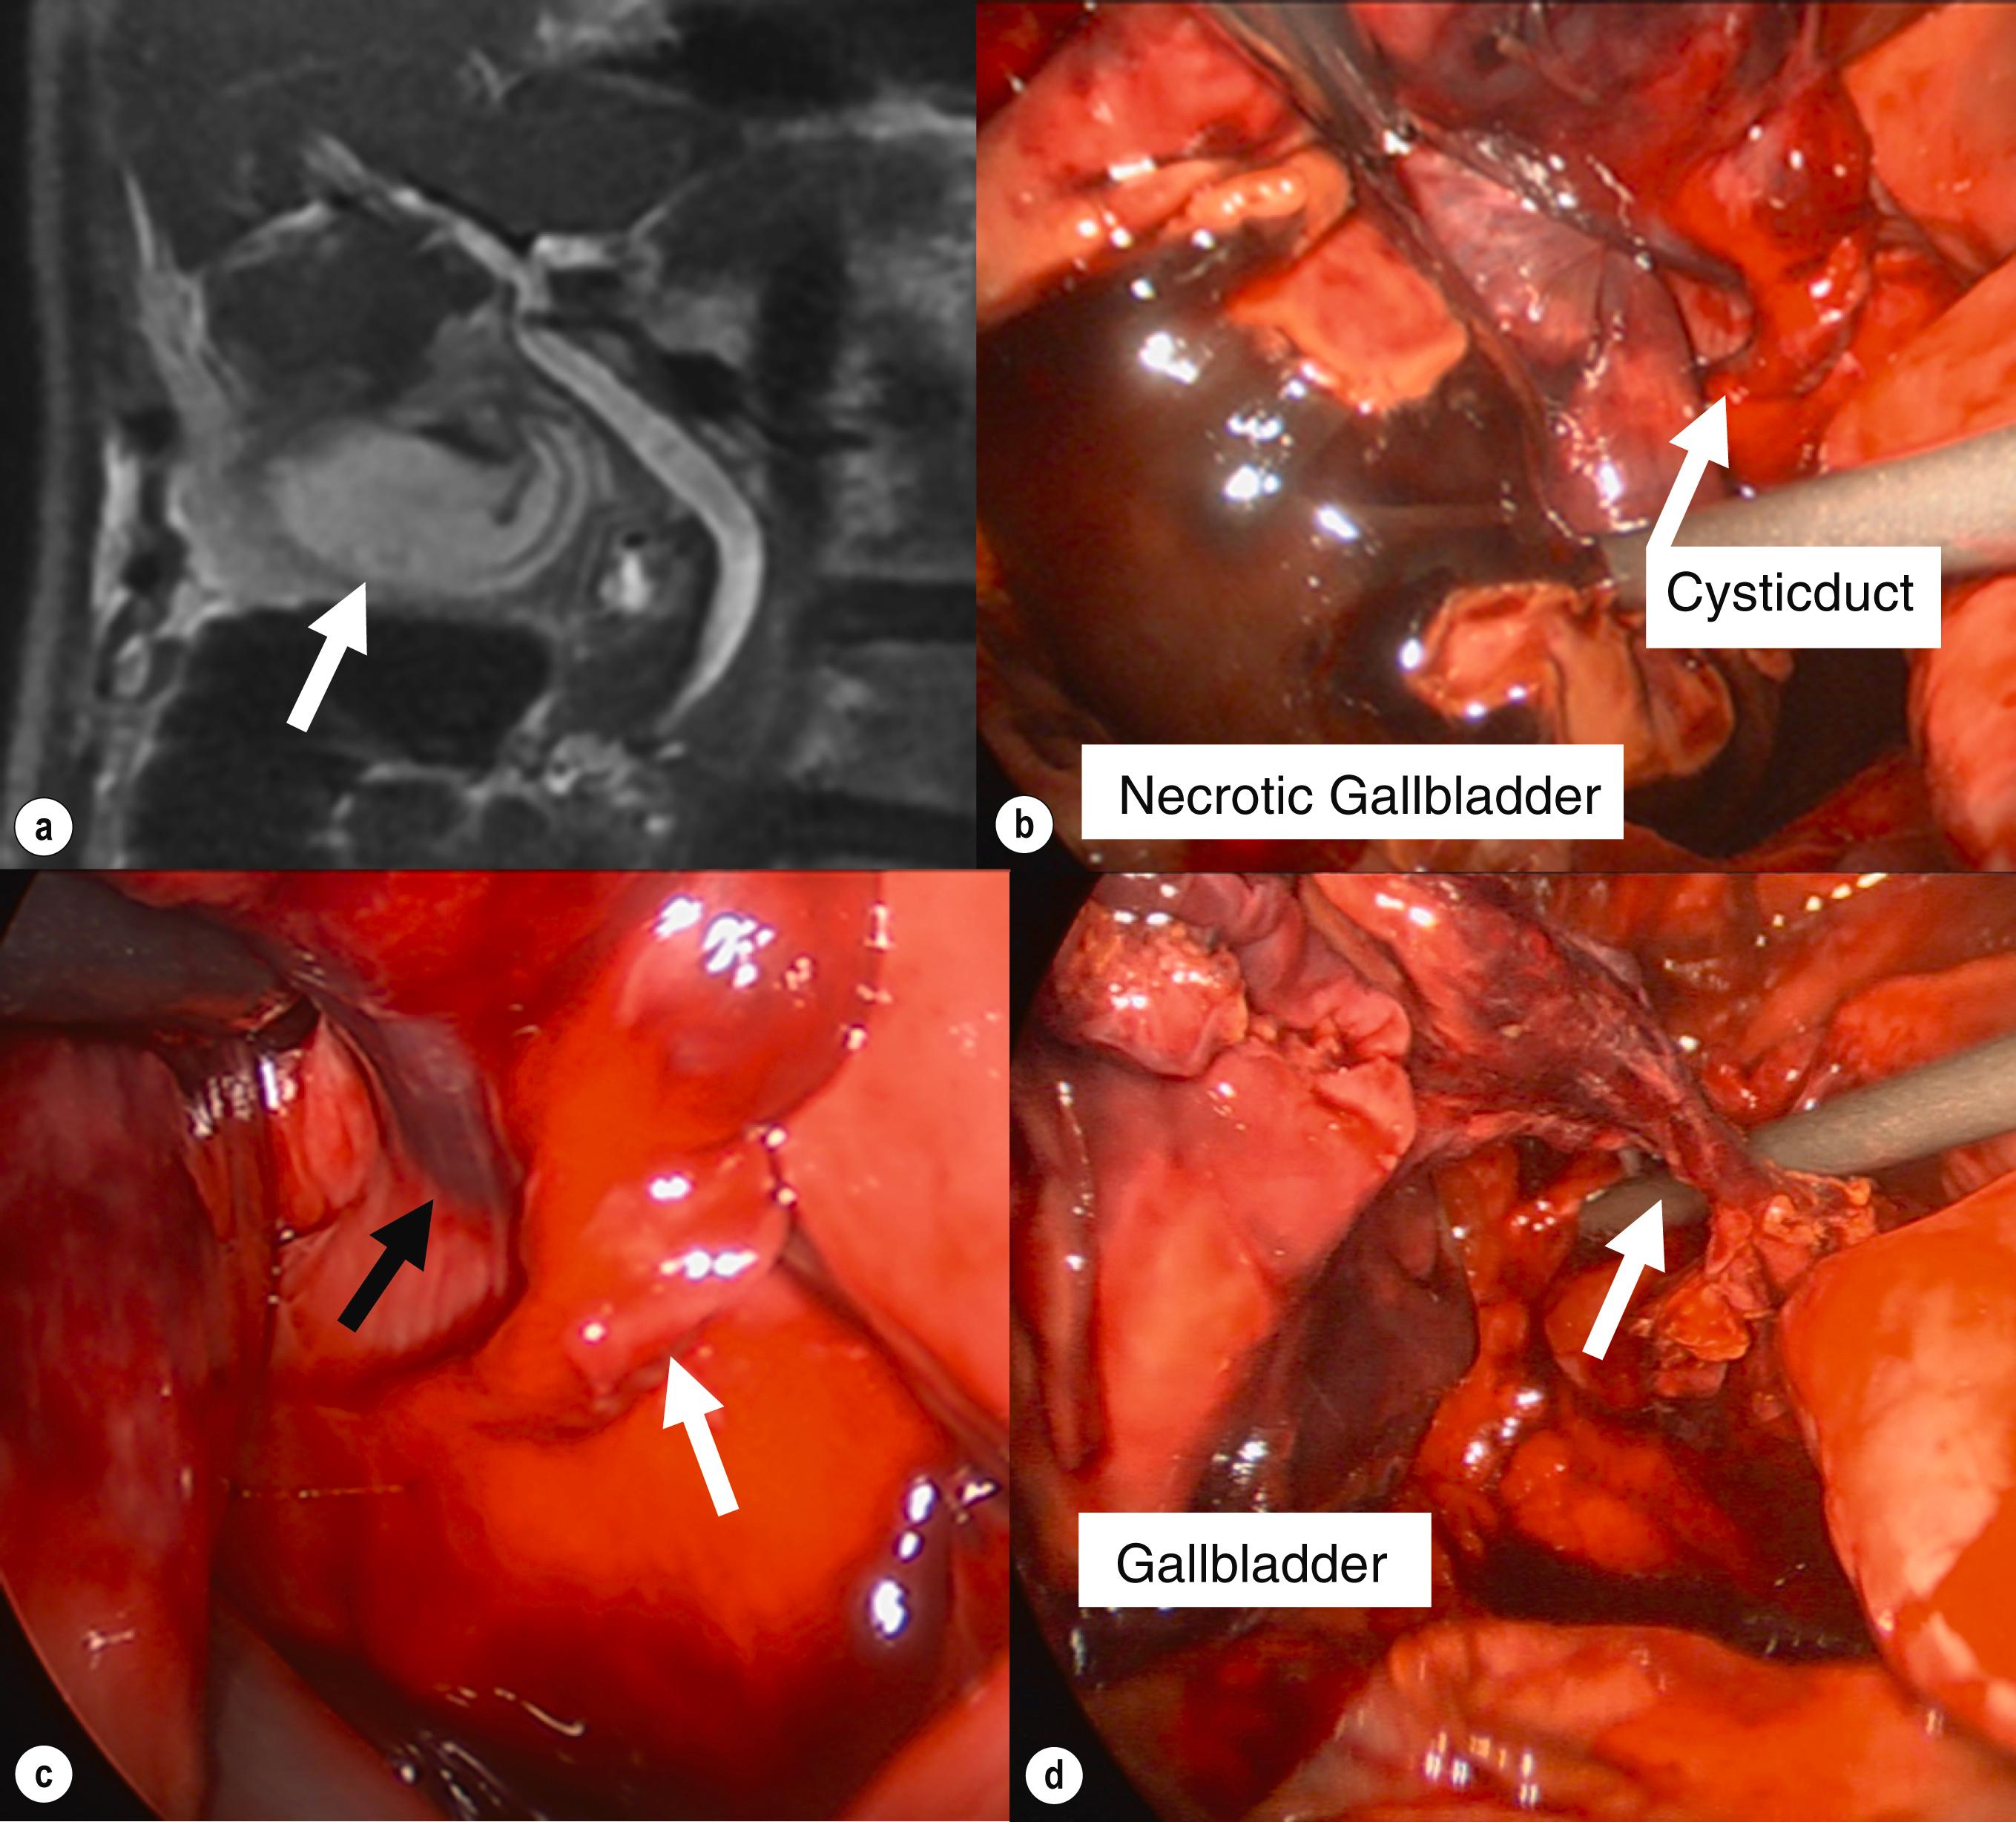 Figure 14.4, An 86-year-old man presents with predicted moderate acute cholecystitis. Magnetic resonance imaging (MRI) shows features of cholecystitis. Note transverse orientation of gallbladder on MRI (a, white arrow ). At surgery, a necrotic gallbladder secondary to acute torsion is observed (b) . The cystic duct is twisted ( c , white arrow ) and a narrow mesentery can be seen ( c , black arrow ) and the gallbladder lies free of the hepatic surface. With the gallbladder detorted and small mesentery divided the gallbladder can be seen attached by cystic duct alone ( d , white arrow ). Caution is required given lack of classical landmarks to guide safe cholecystectomy.